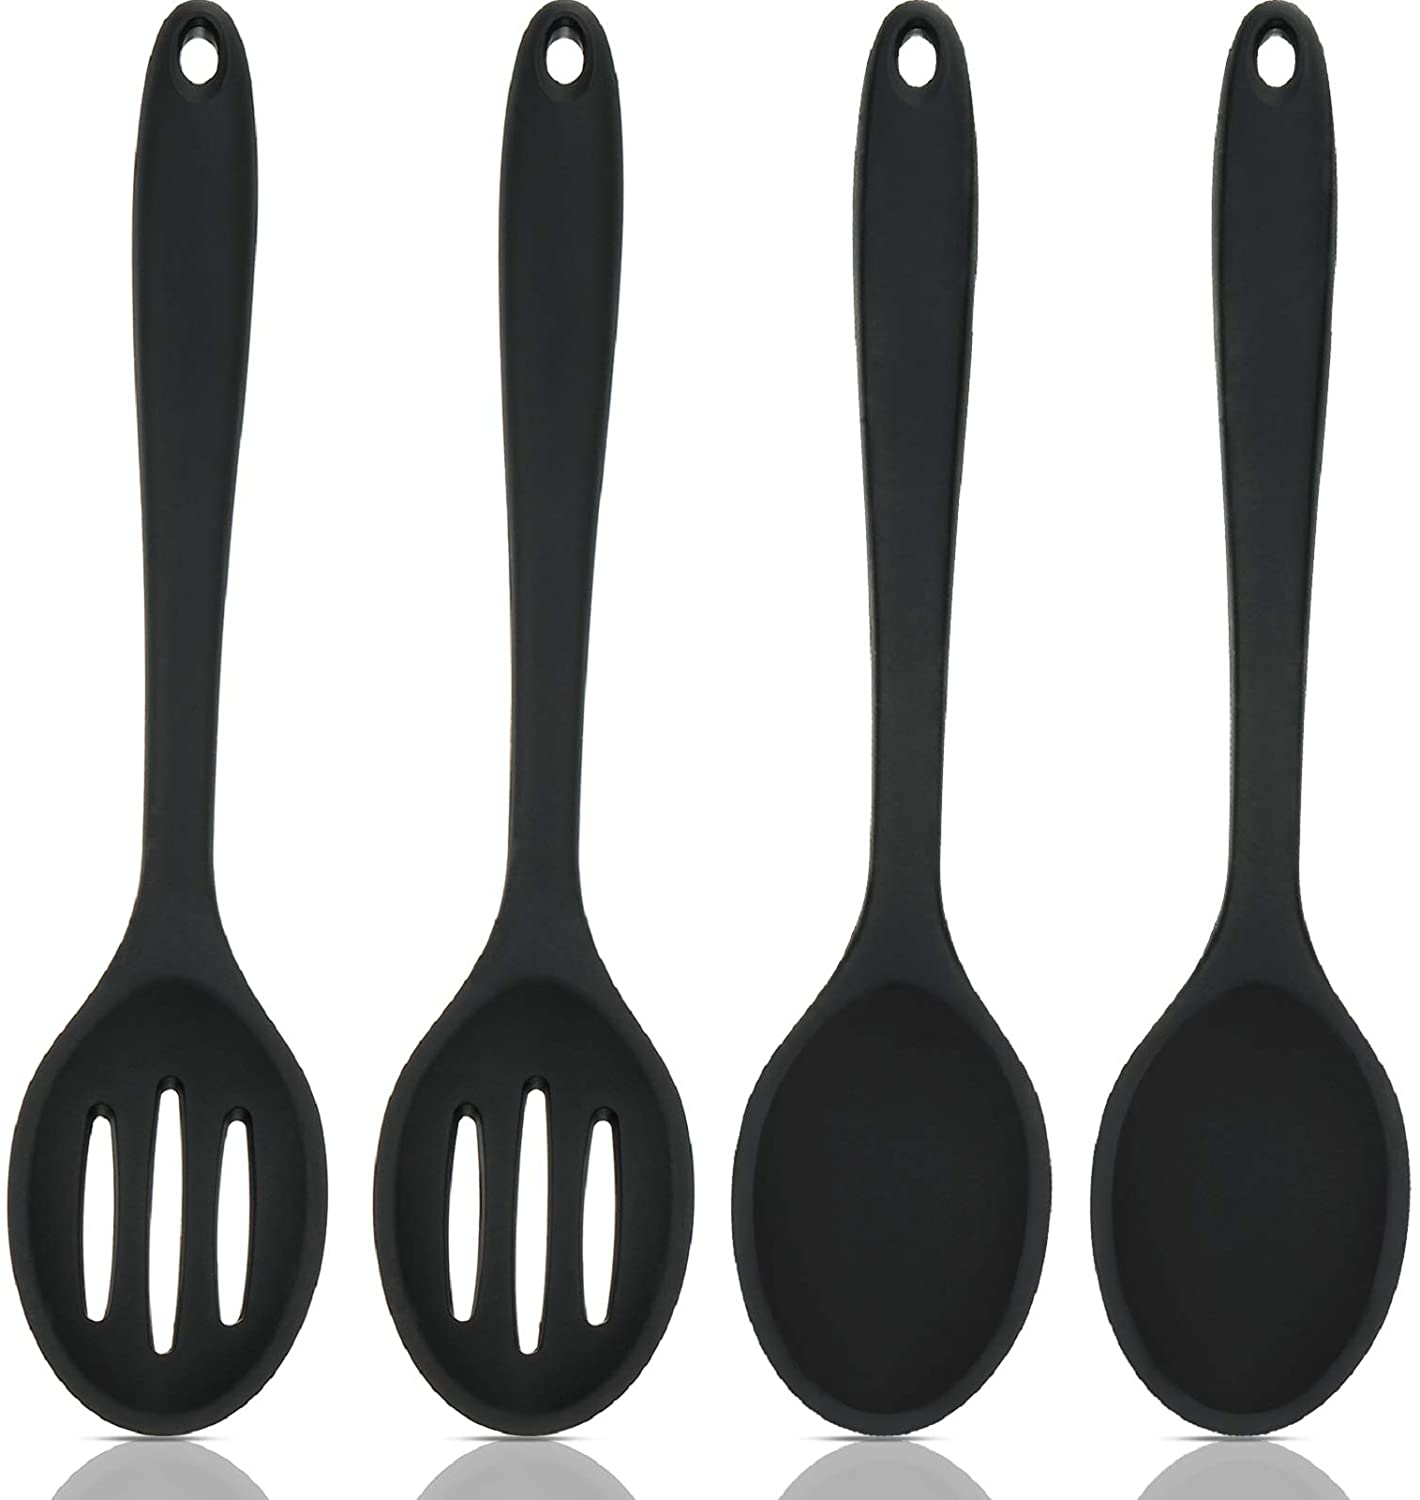 4 Pieces Silicone Cooking Spoons Set